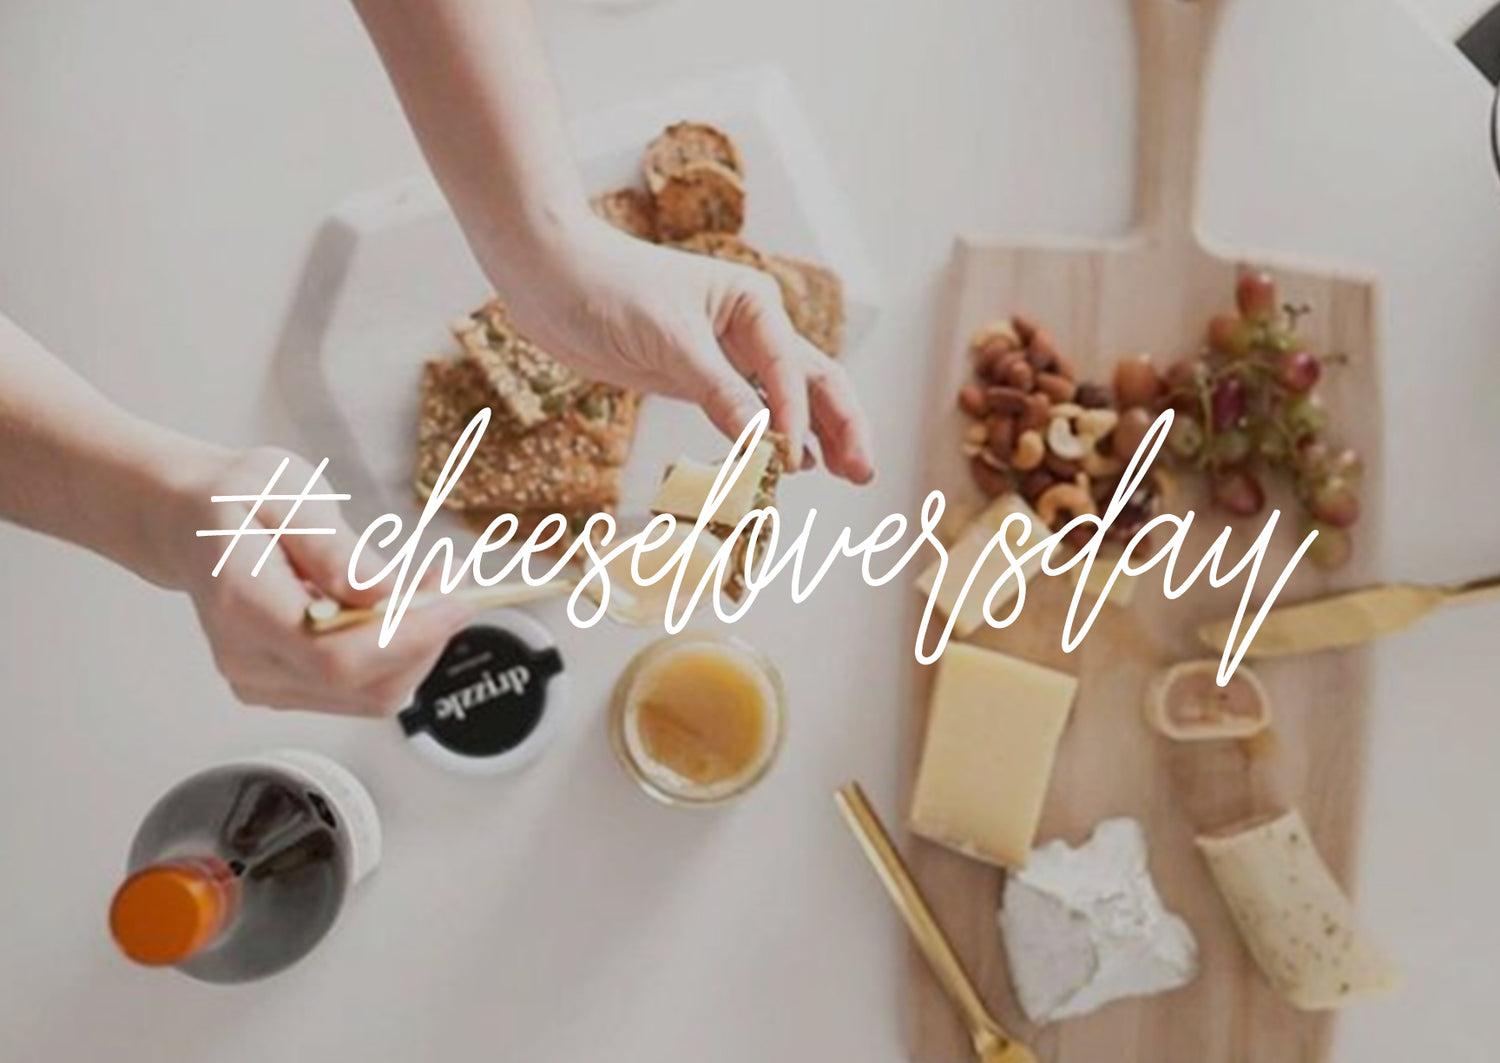 #Cheeseloversday Recipes